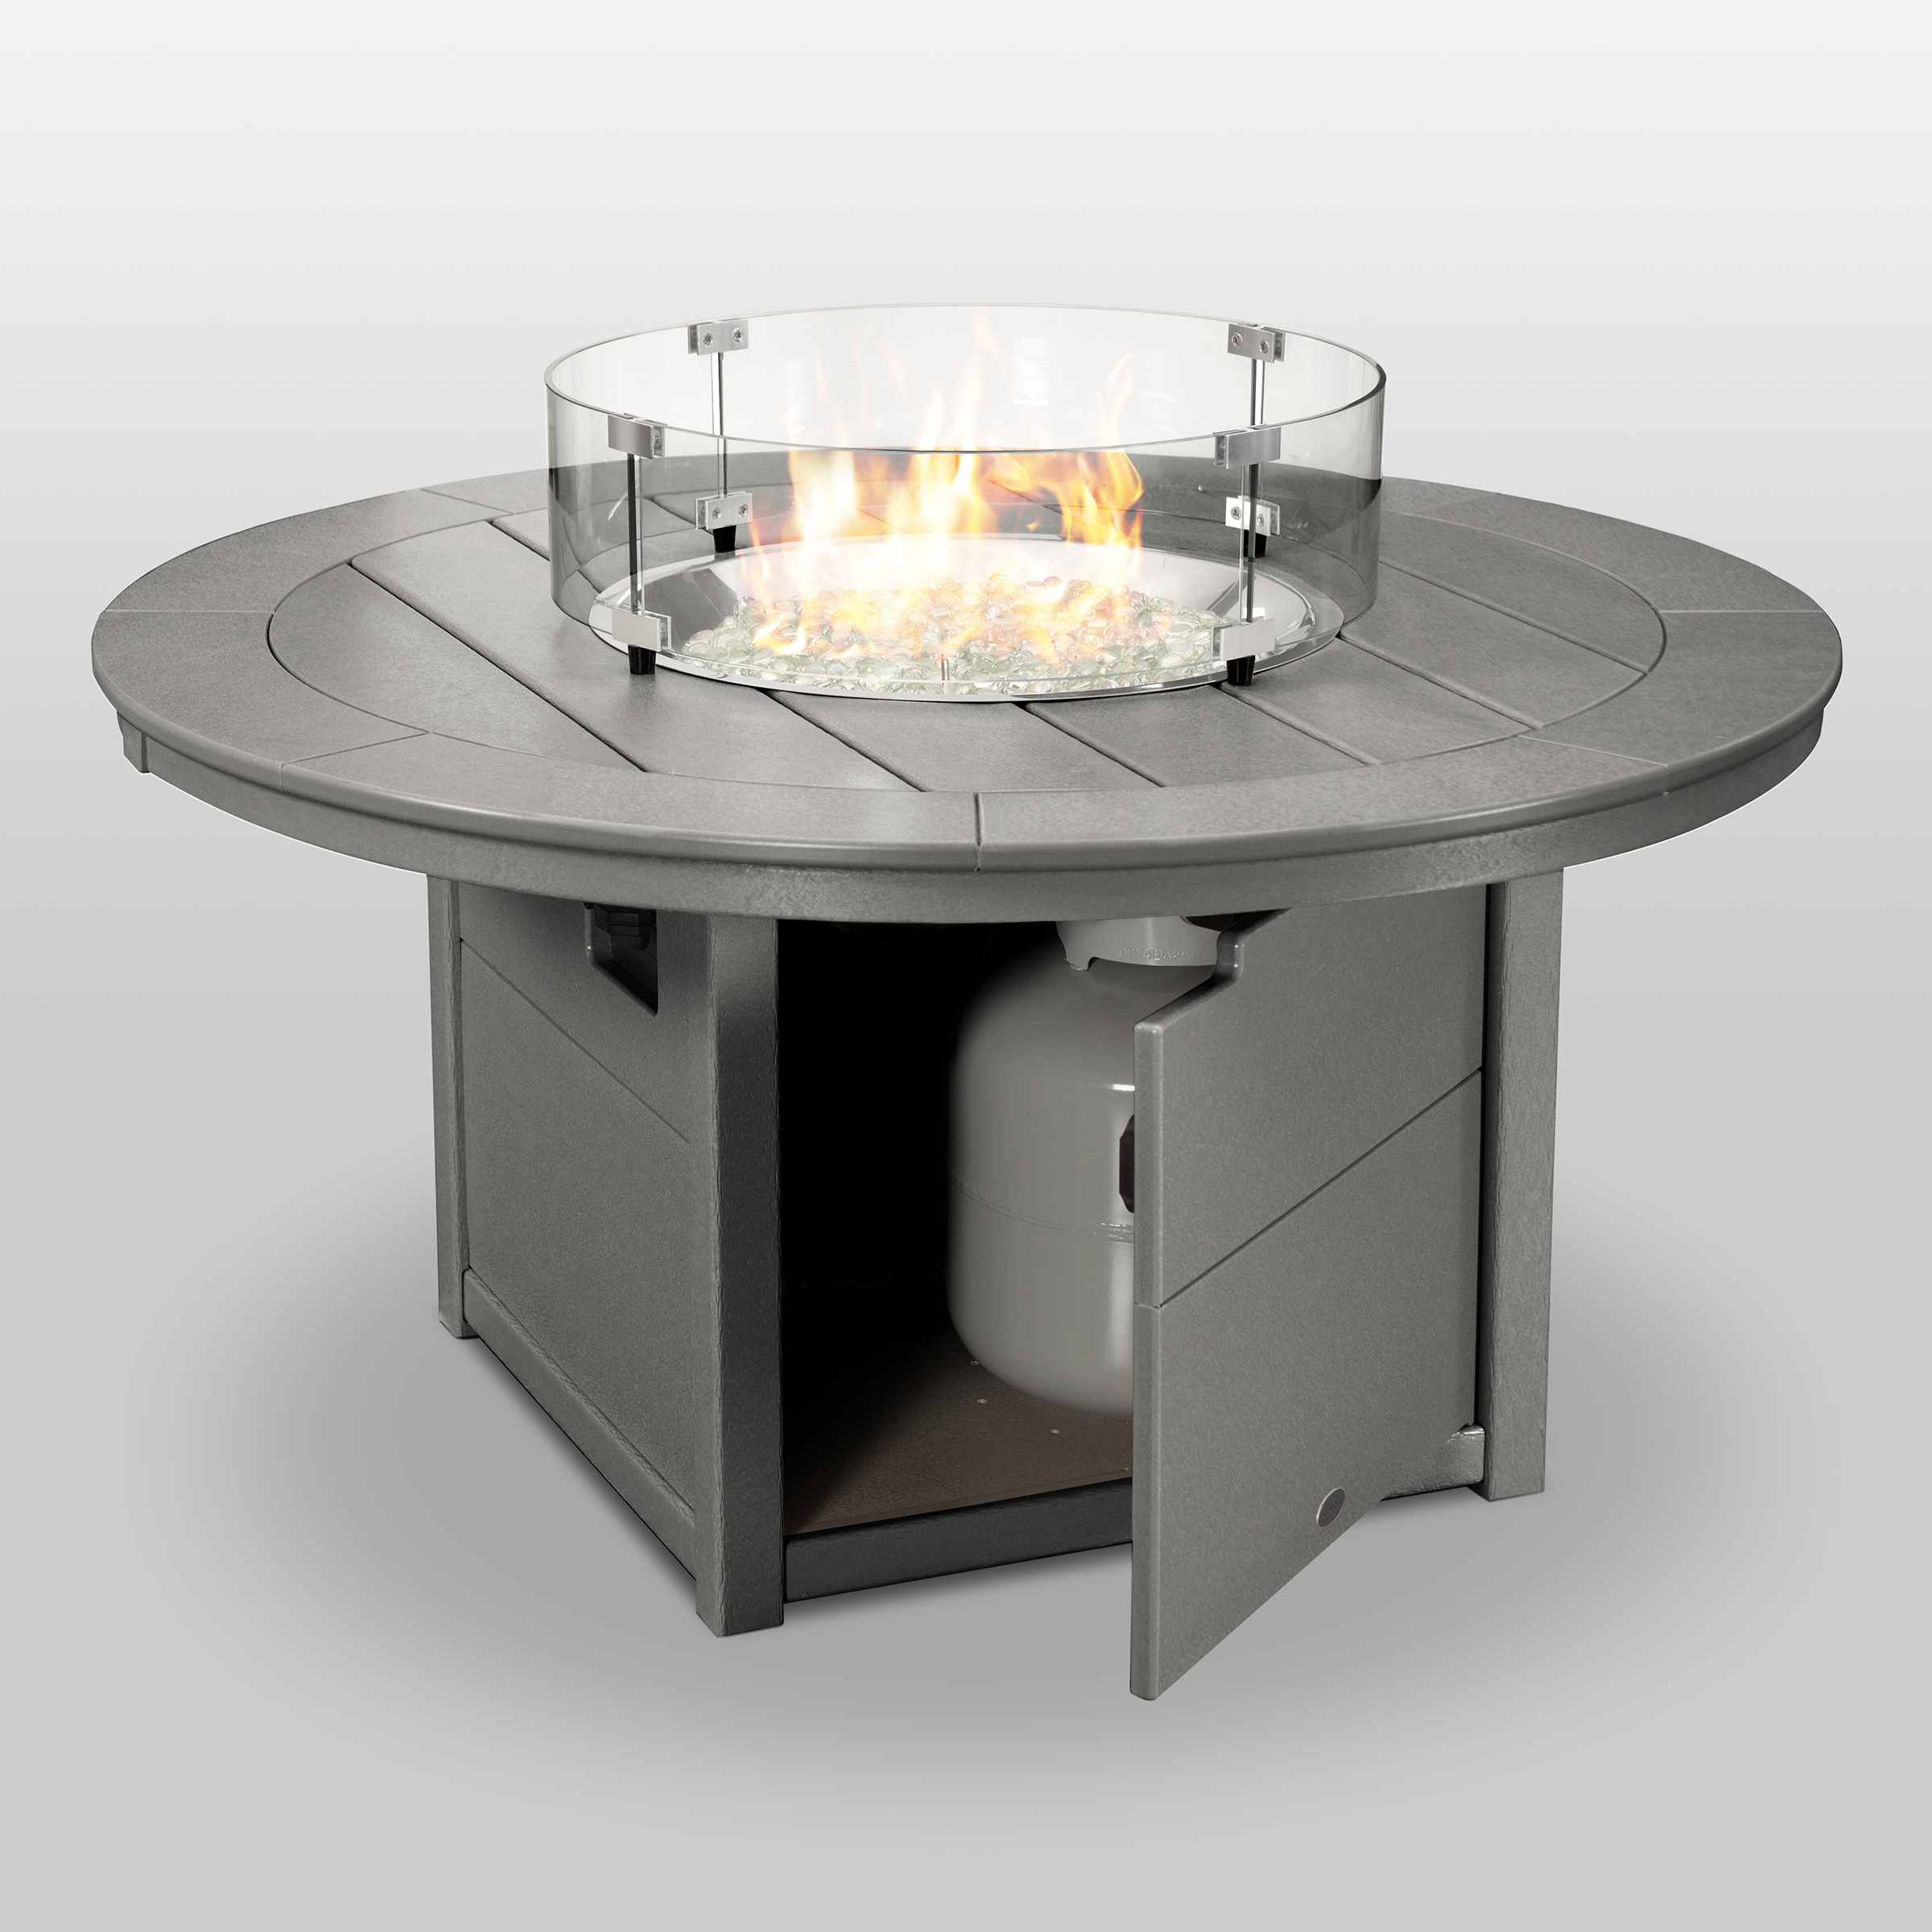 round 48 inch fire pit table in slate grey product image